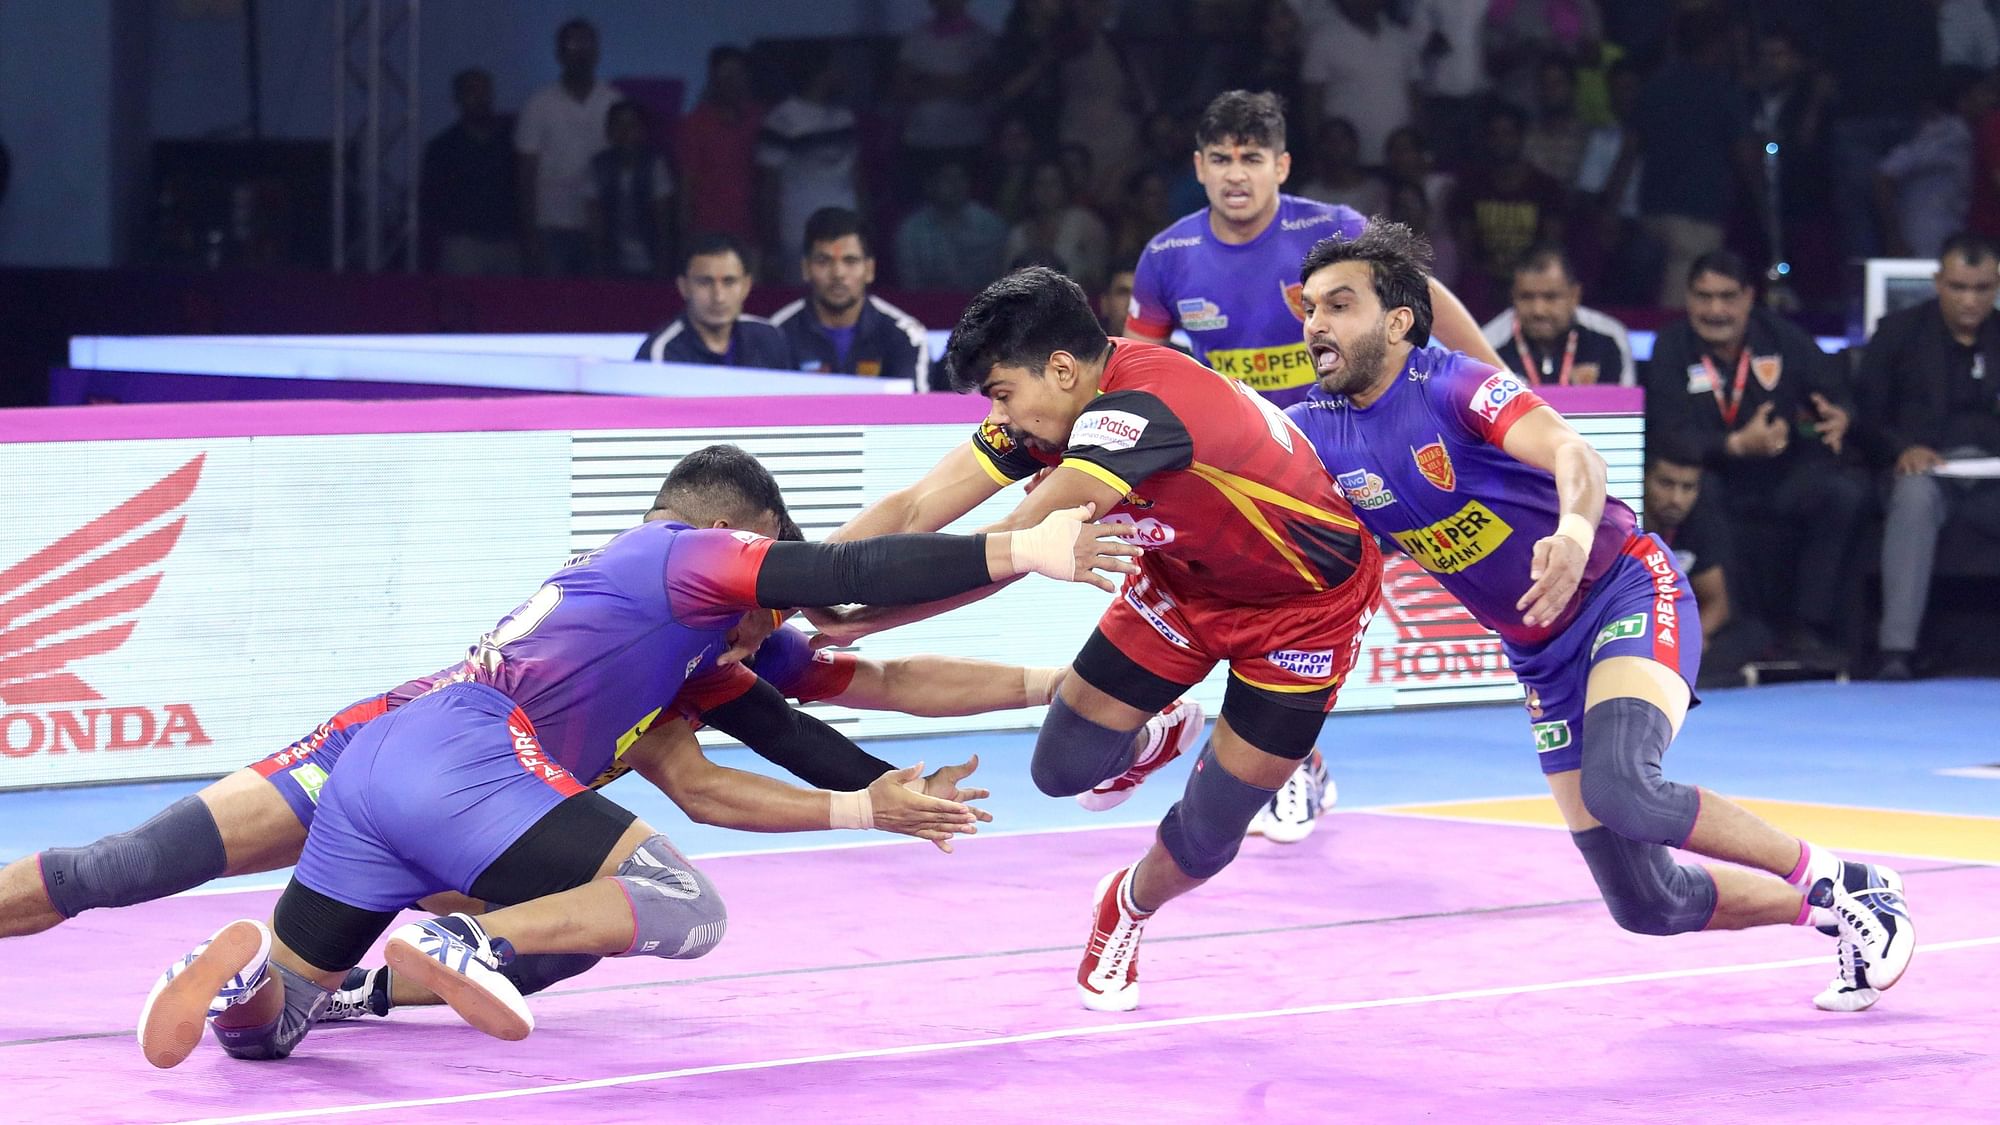 The match was billed as the clash of the league’s best raiders in Delhi’s Naveen Kumar and Pawan Sehrawat of Bulls.